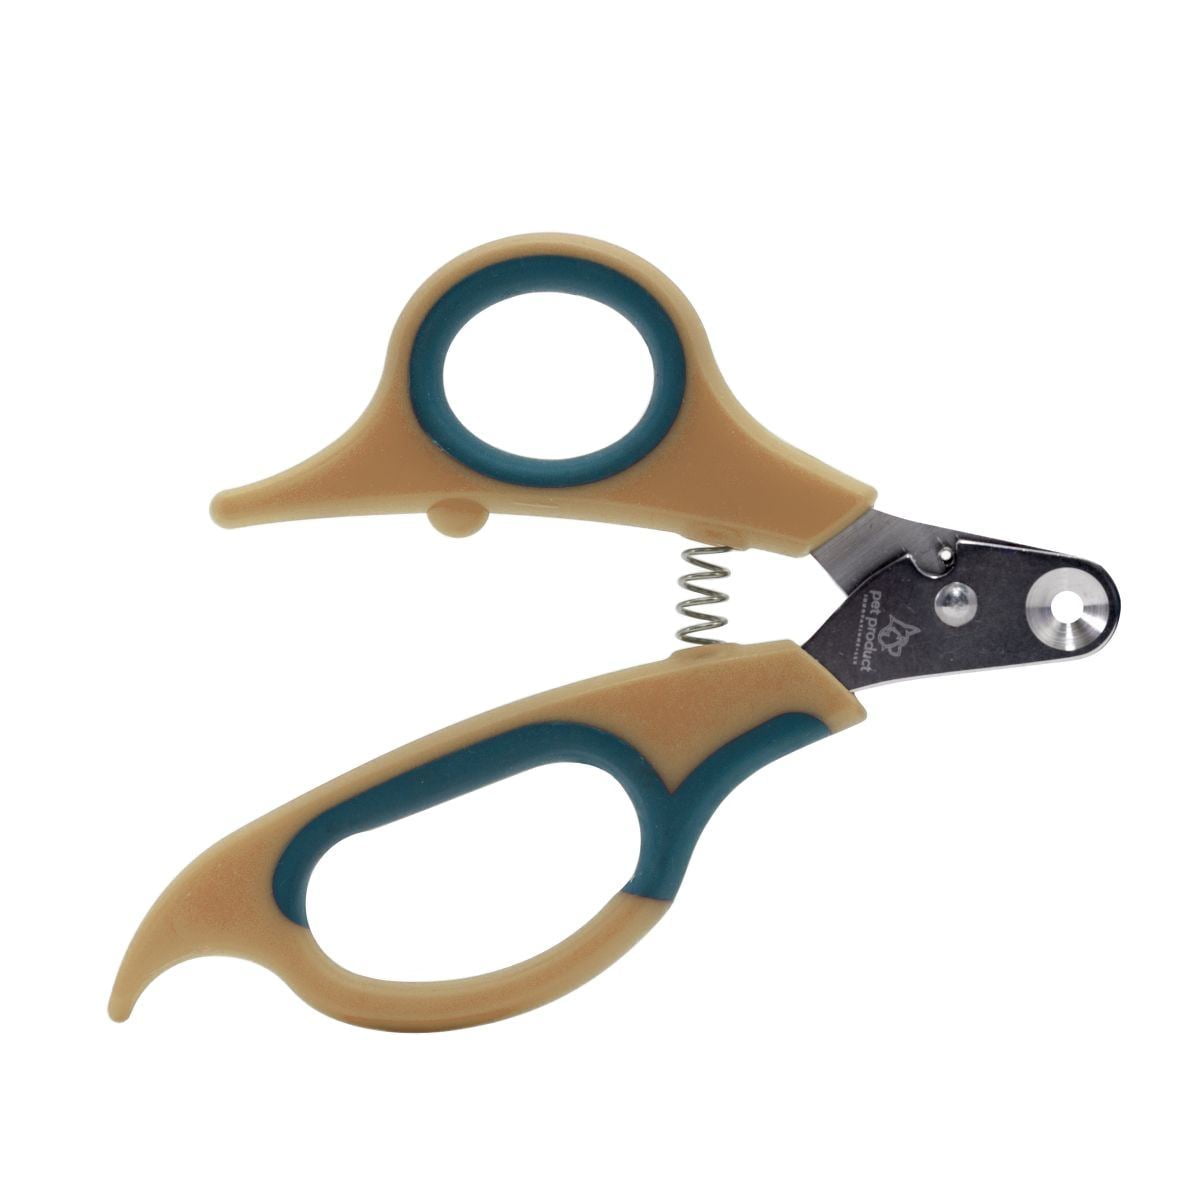 cat claw clippers walmart